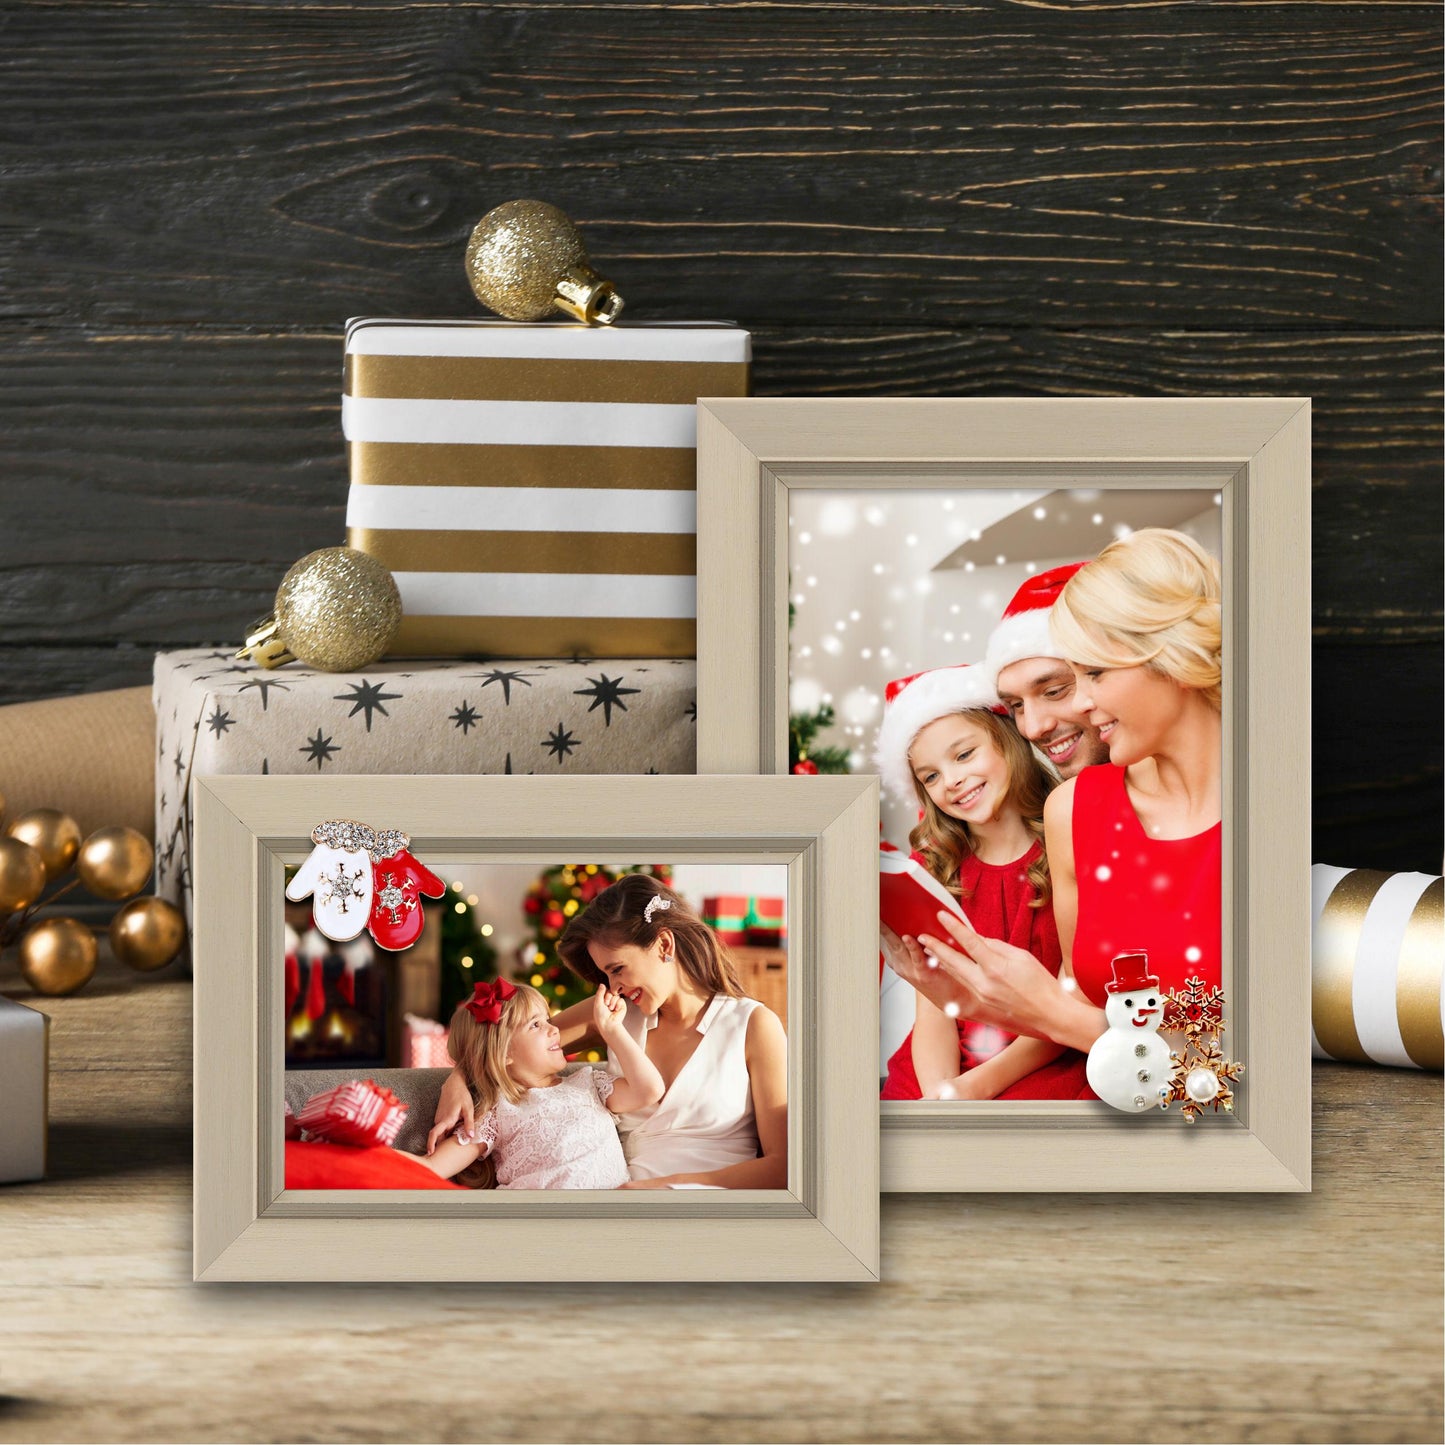 Christmas Picture Frame Photo Frame Embellished Gift for Wall and Tabletop Display (5x7 and 4x6, Beige)